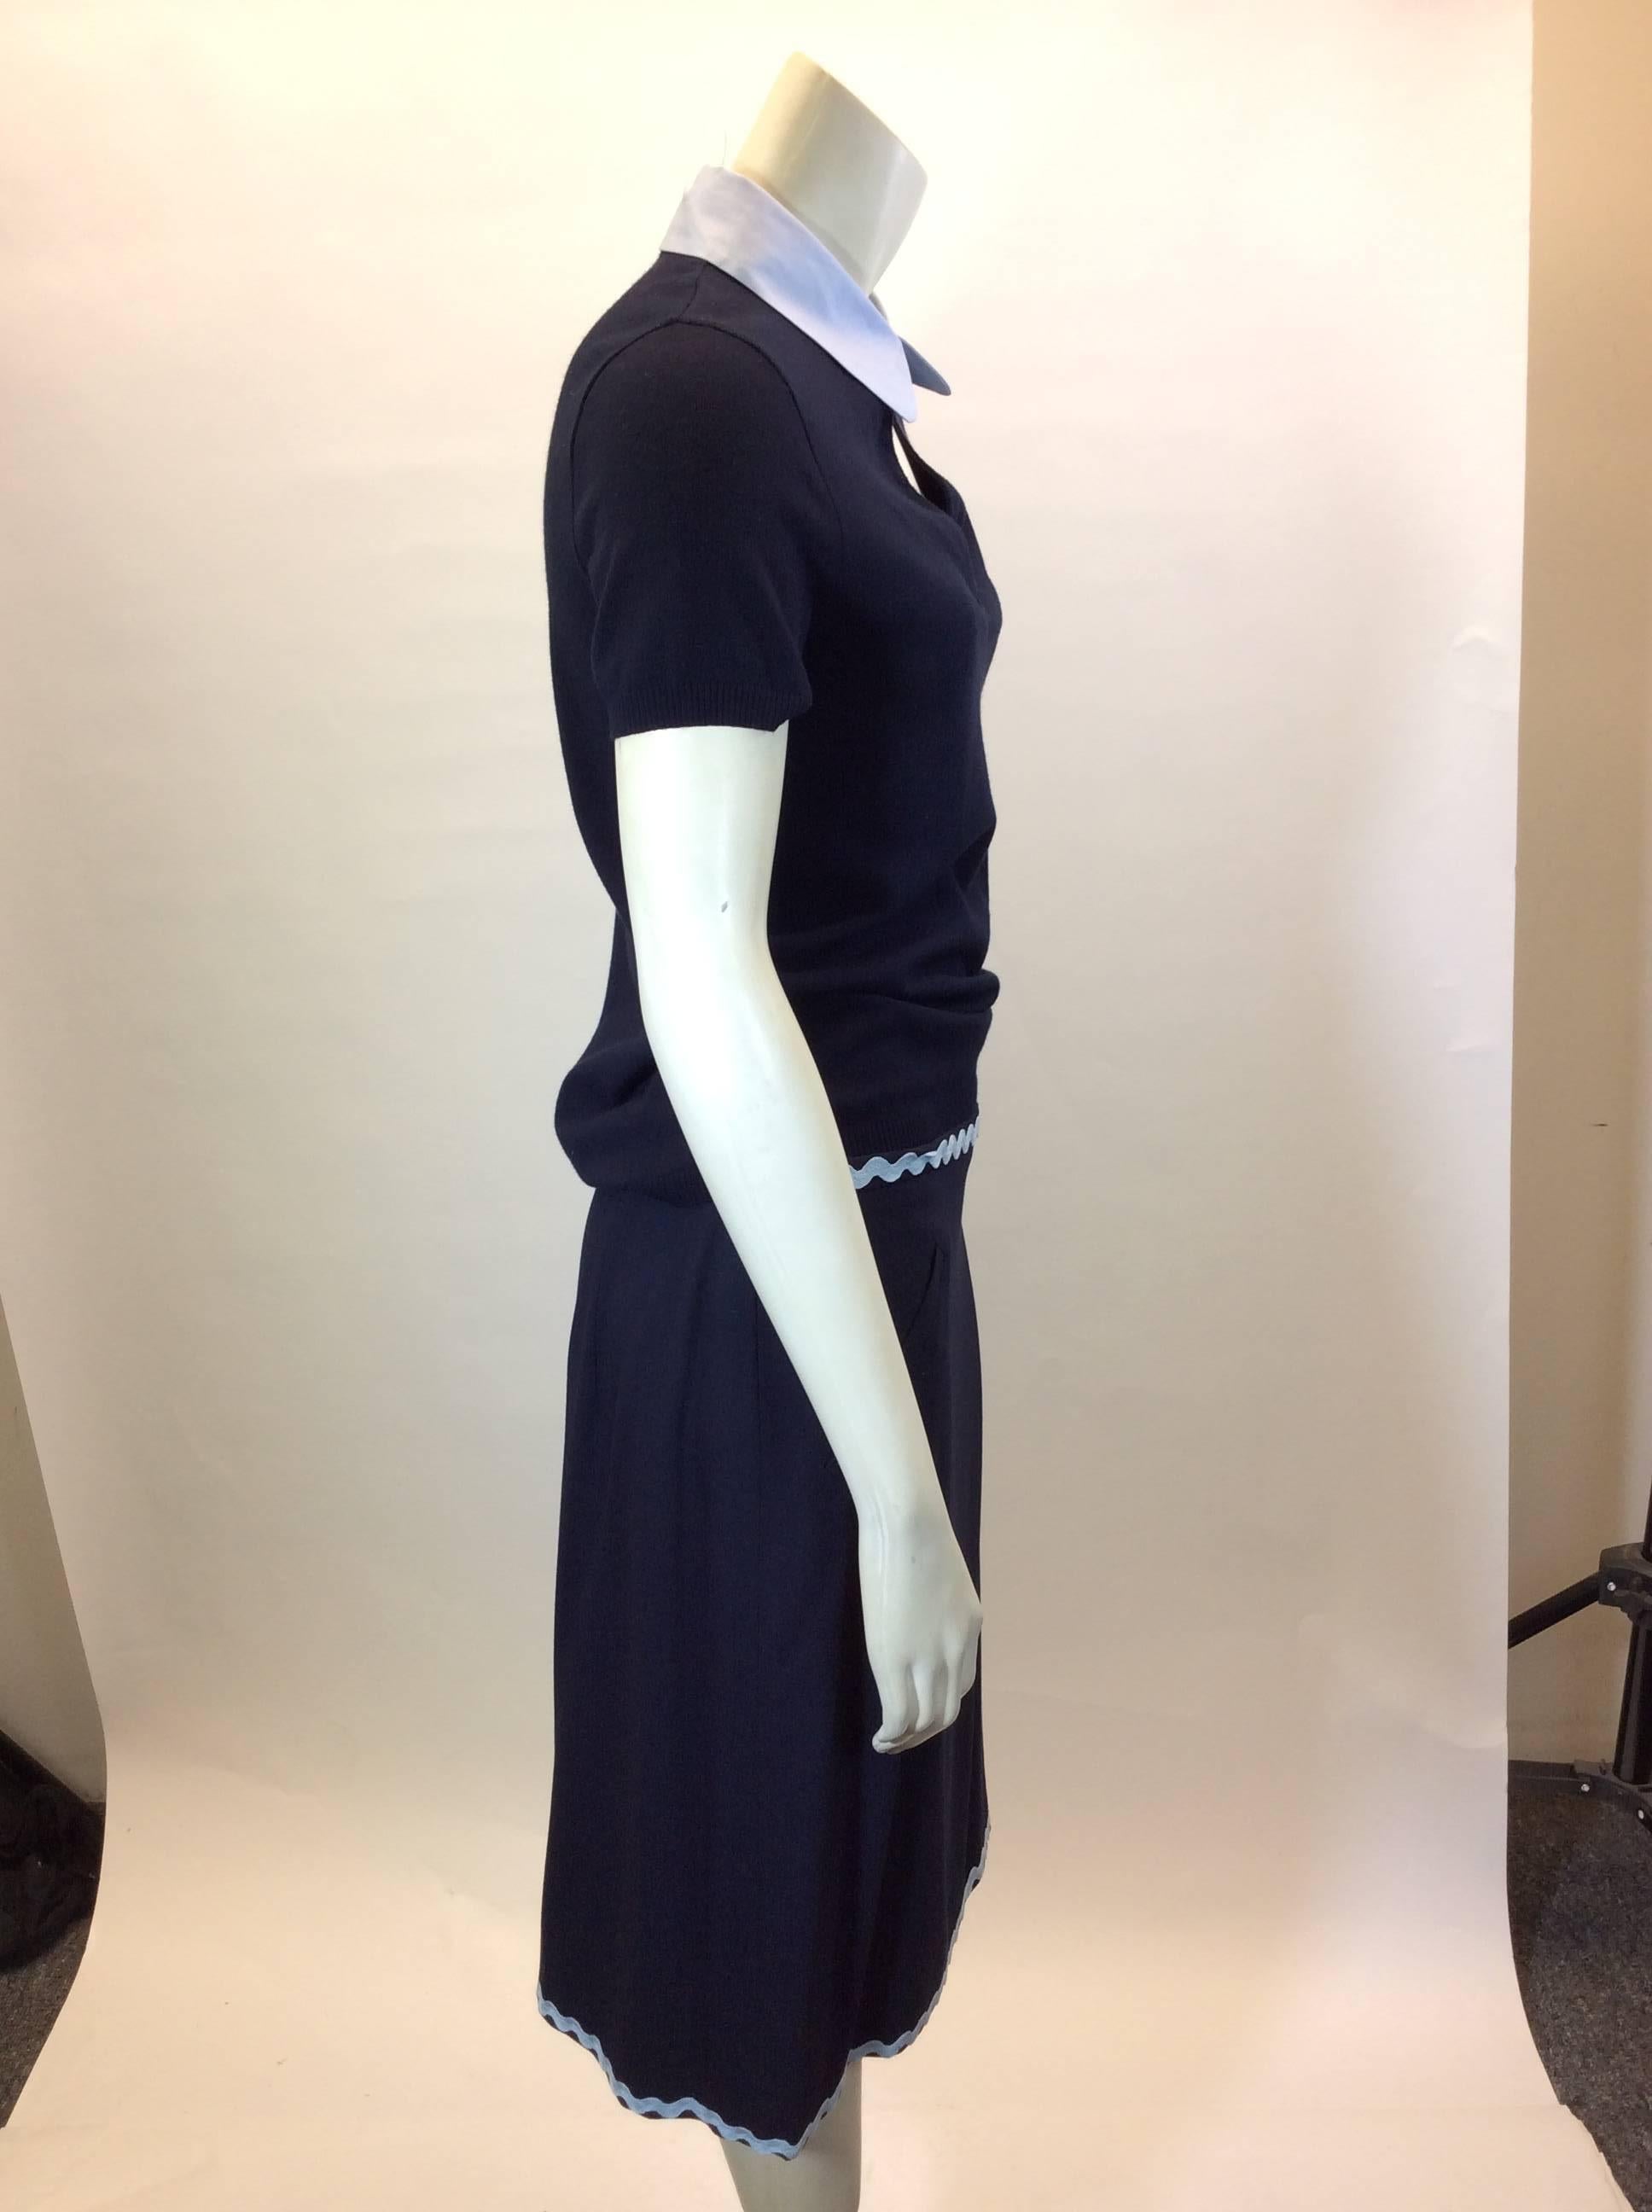 Moschino Navy 2 Piece Skirt Suit Size 10
Short sleeve top with light blue peter pan collar 
Top is Rayon & Wool
Skirt is lined and has 2 pockets
Skirt has light blue trim
																	